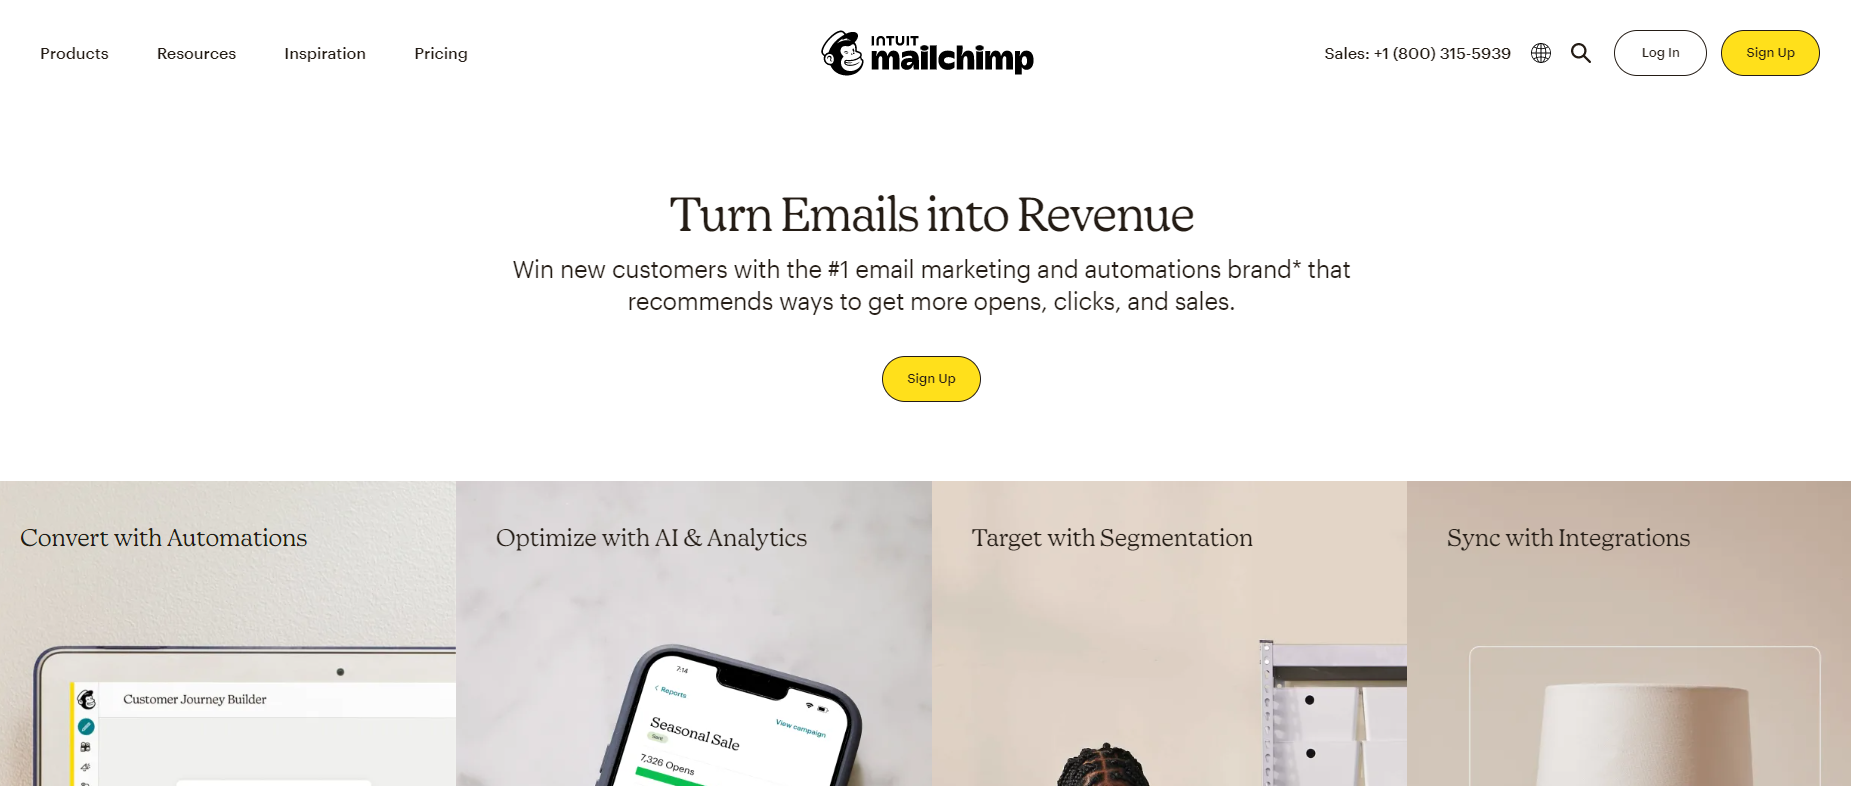 screenshot of the Mailchimp email marketing tool homepage